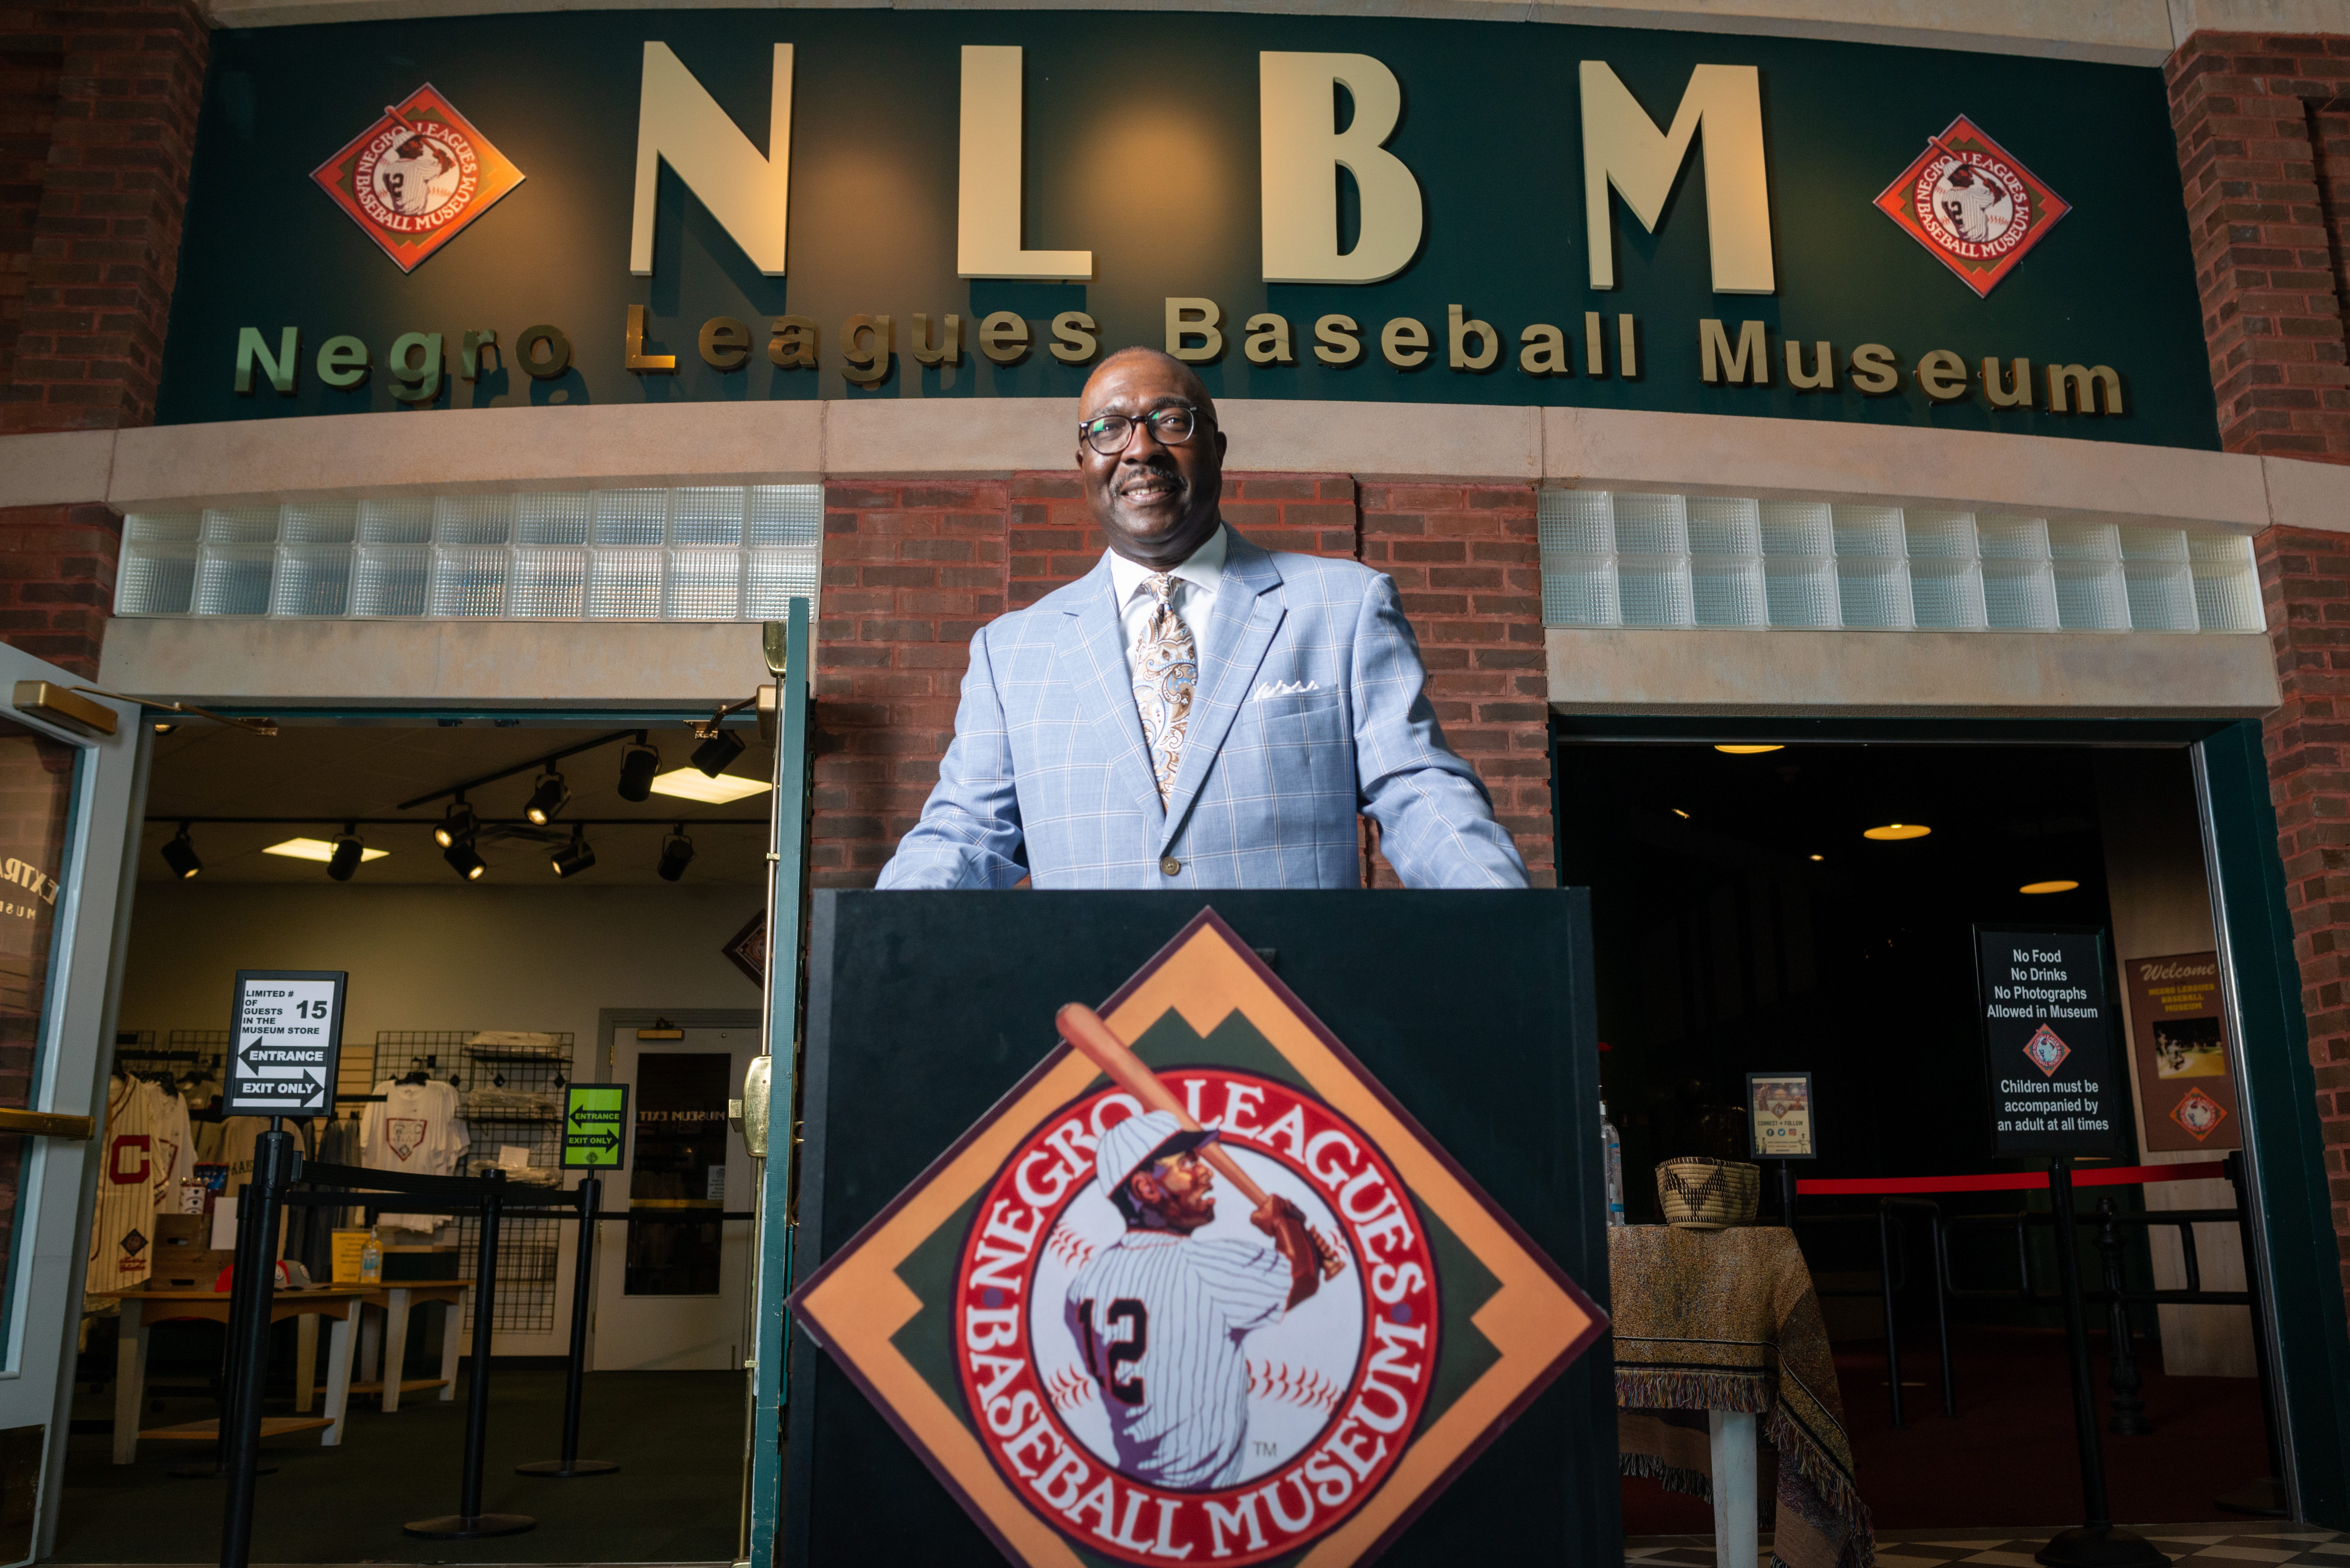 Bob Kendrick on X: Next time you're flying in or out of @Fly_KansasCity,  be sure to stop in THE LEAGUES Sports Lounge & Eatery. The Negro Leagues  themed sports bar is in